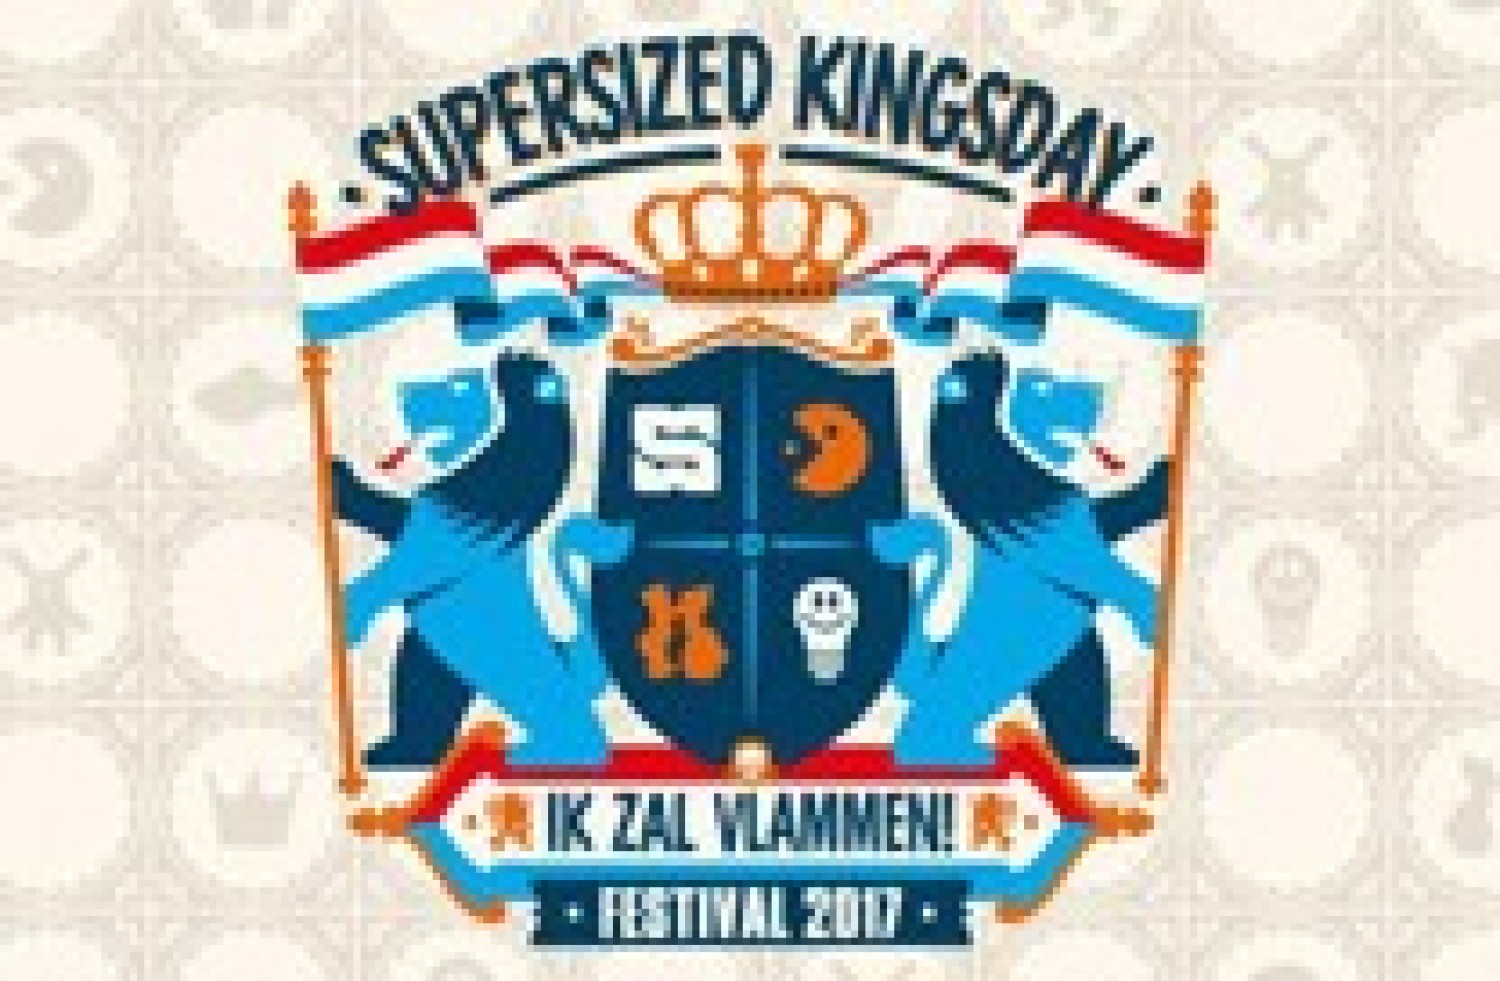 Party report: Supersized Kingsday Festival, Best (27-04-2017)